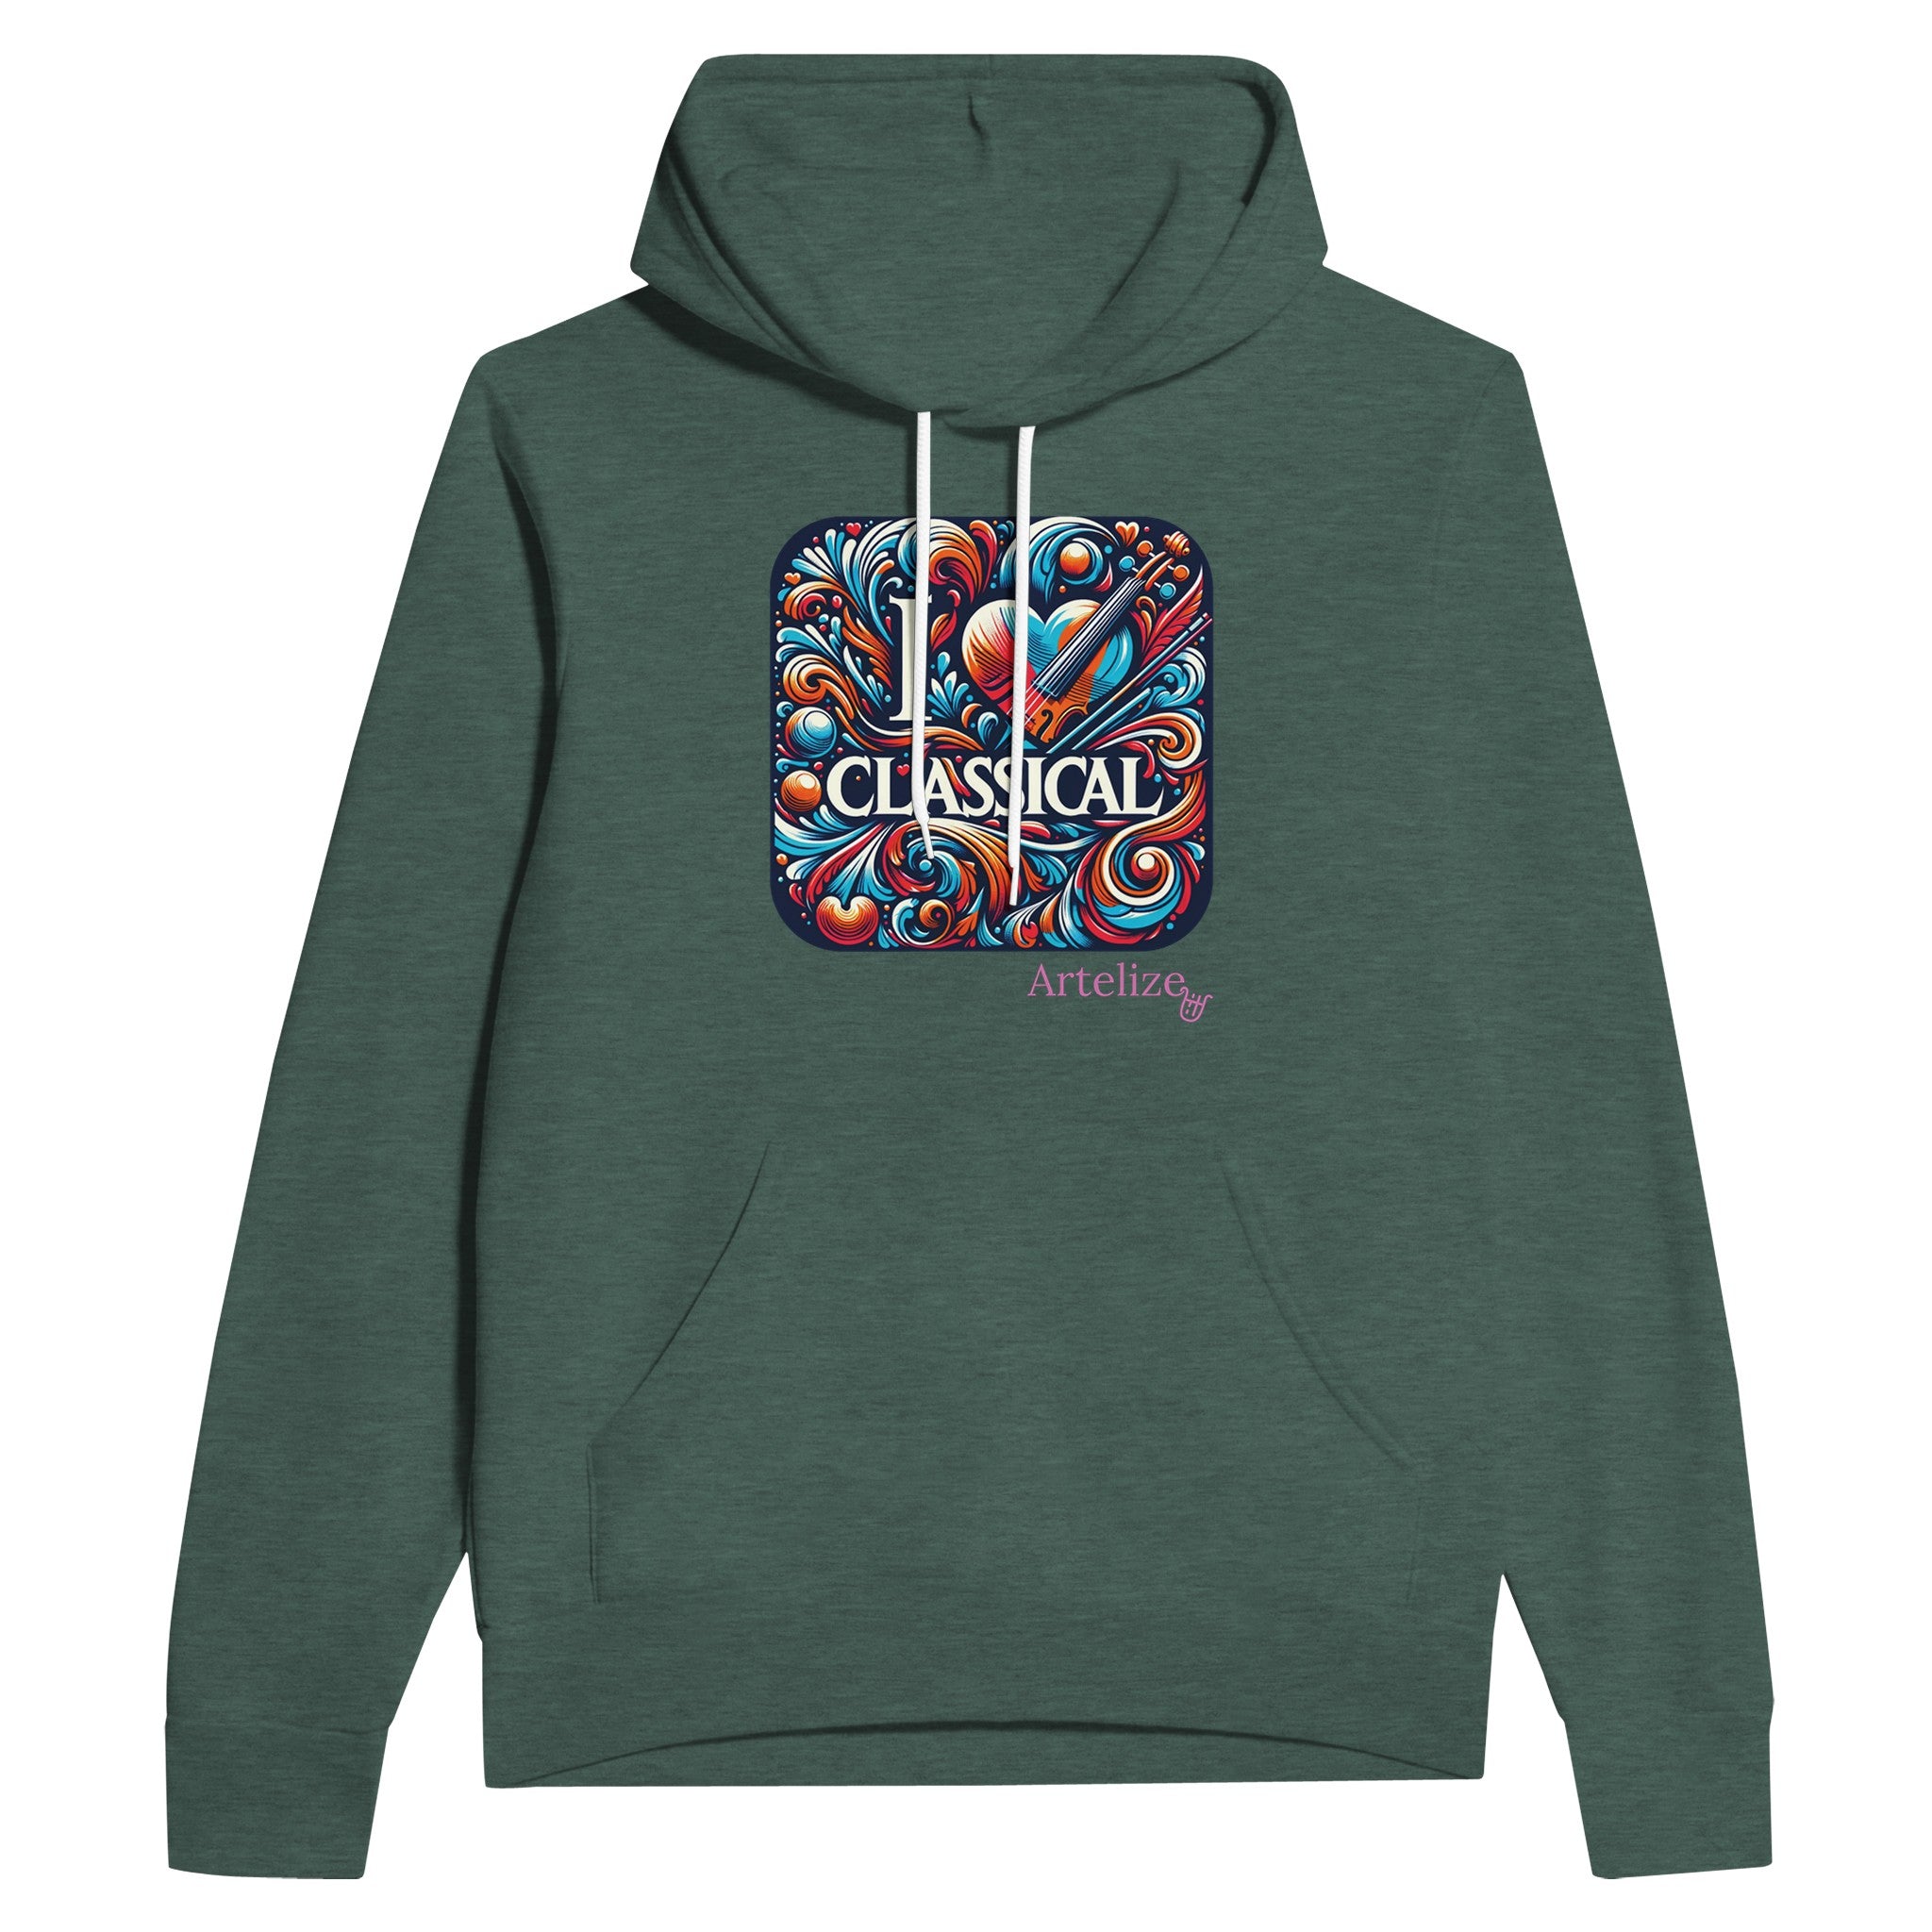 "I LOVE CLASSICAL" Unisex Pullover Hoodie | Bella + Canvas 3719